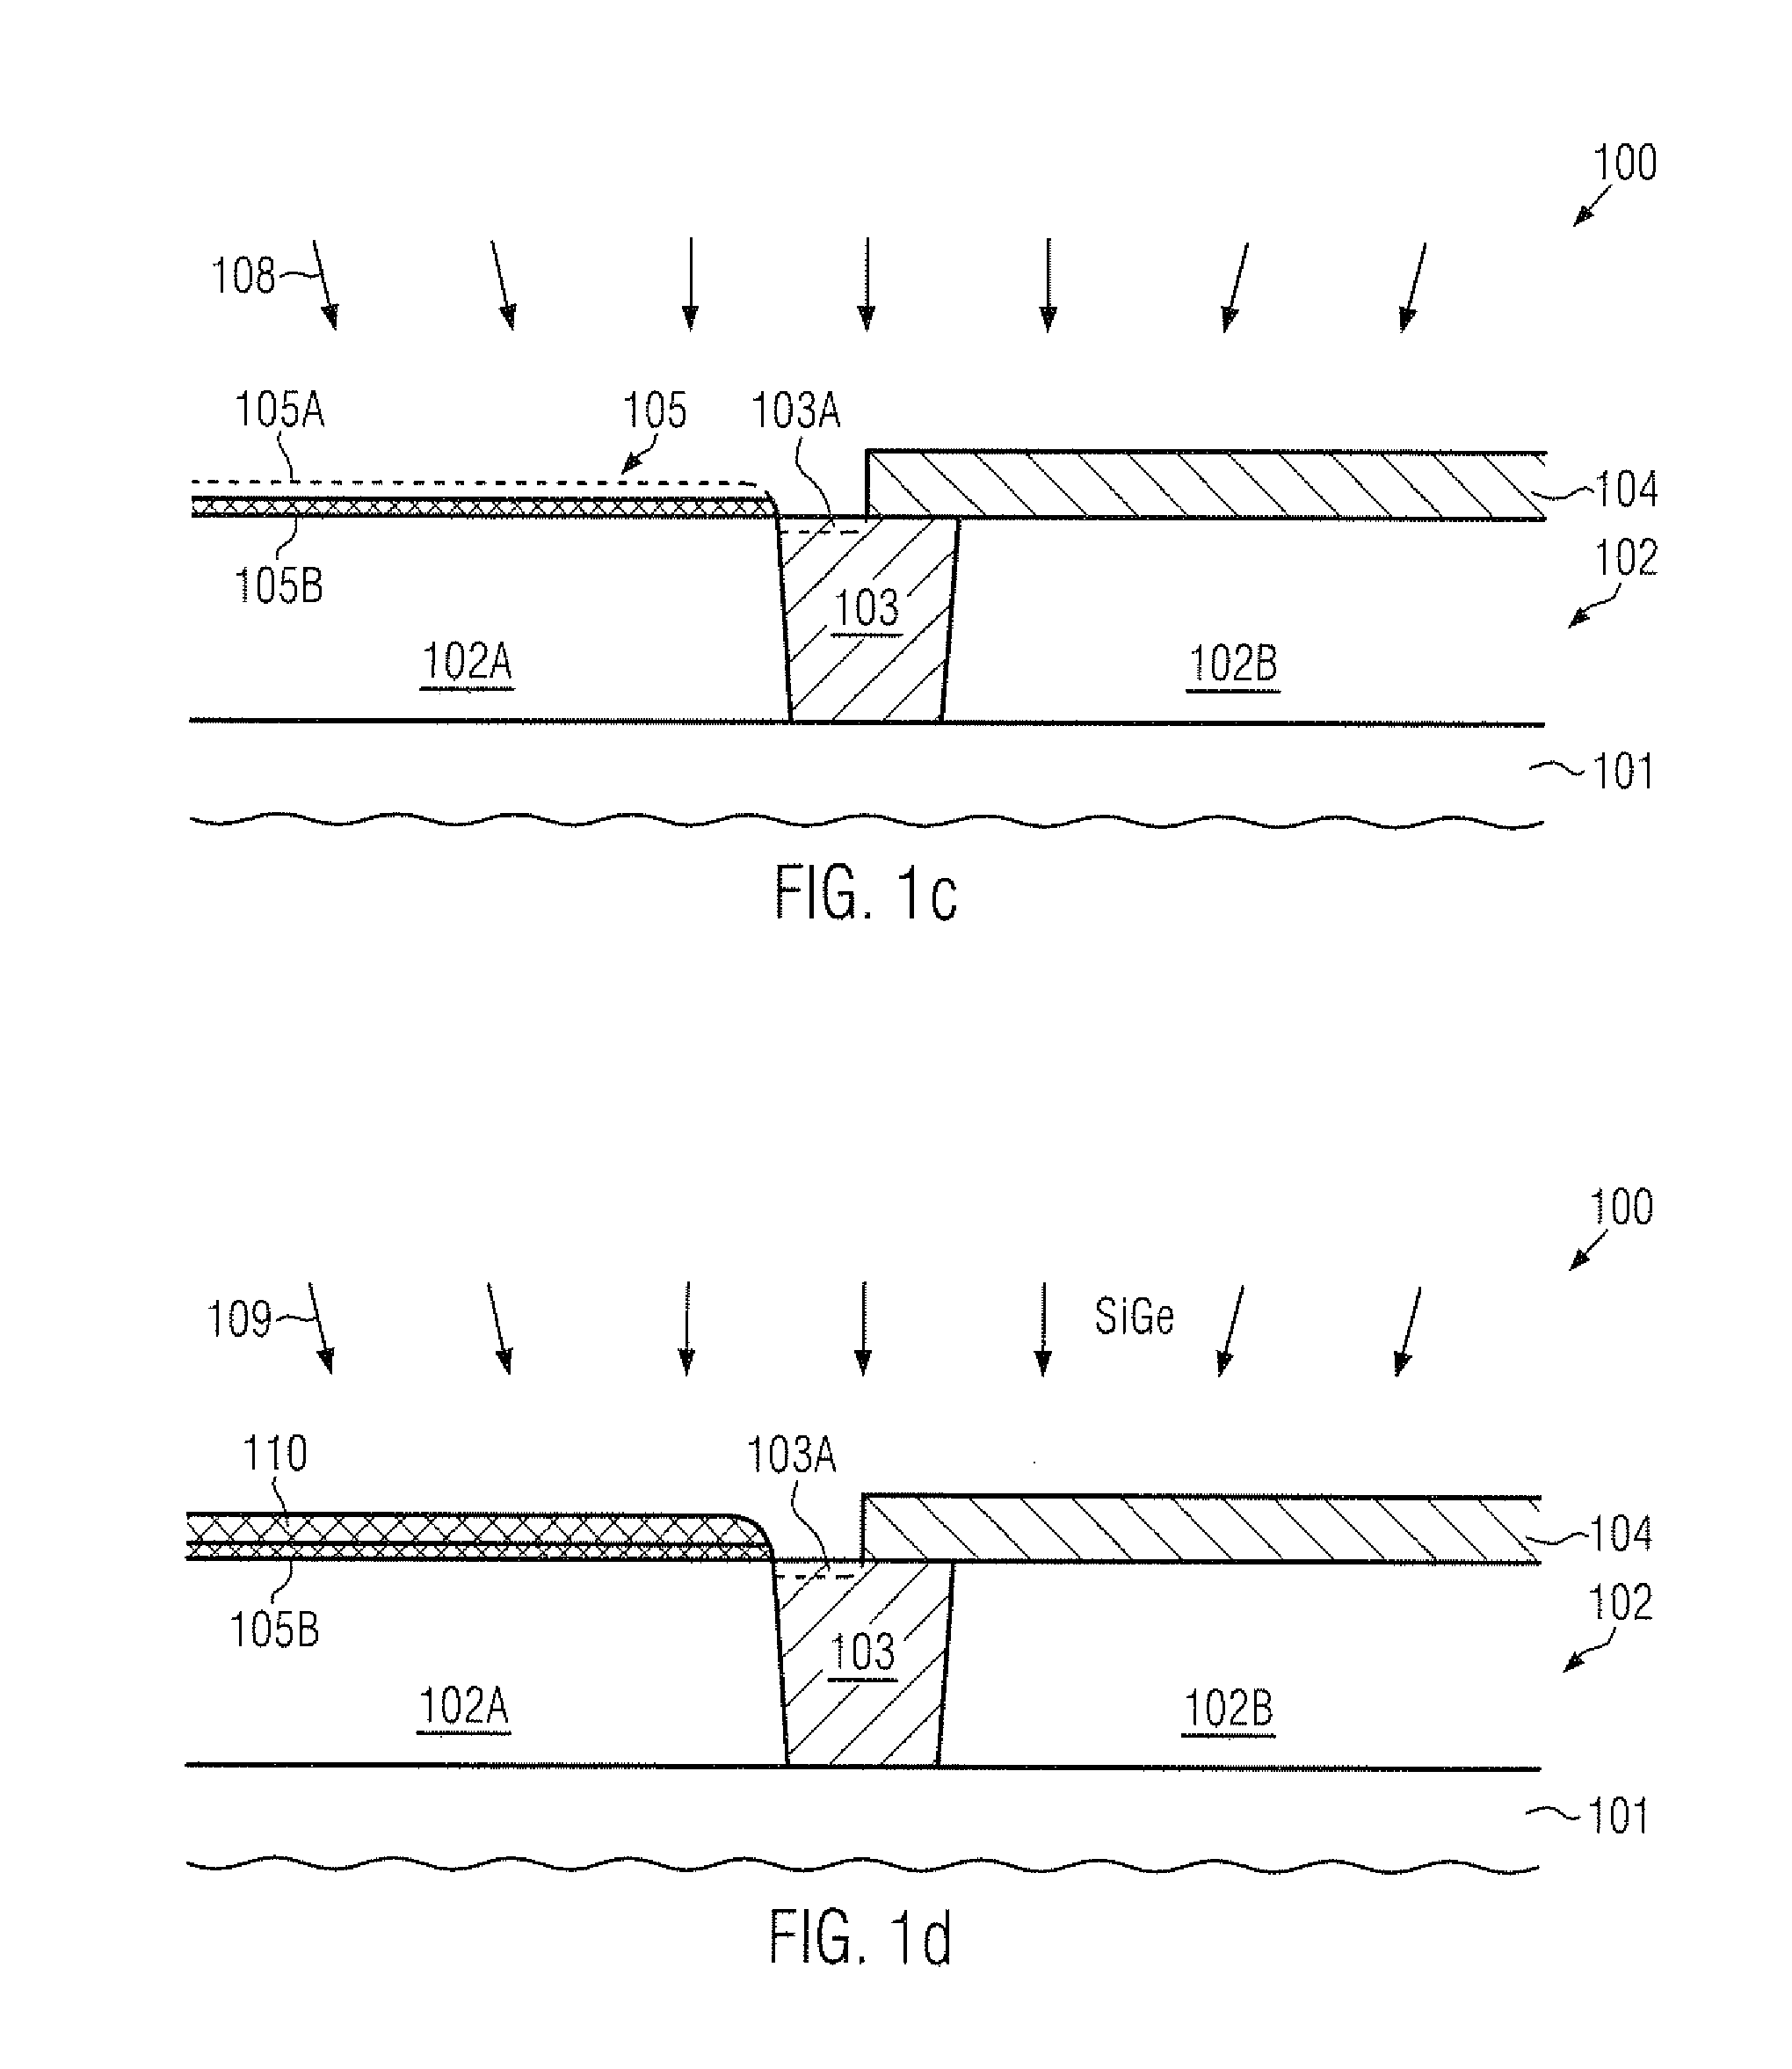 Adjusting of a non-silicon fraction in a semiconductor alloy during transistor fabrication by an intermediate oxidation process